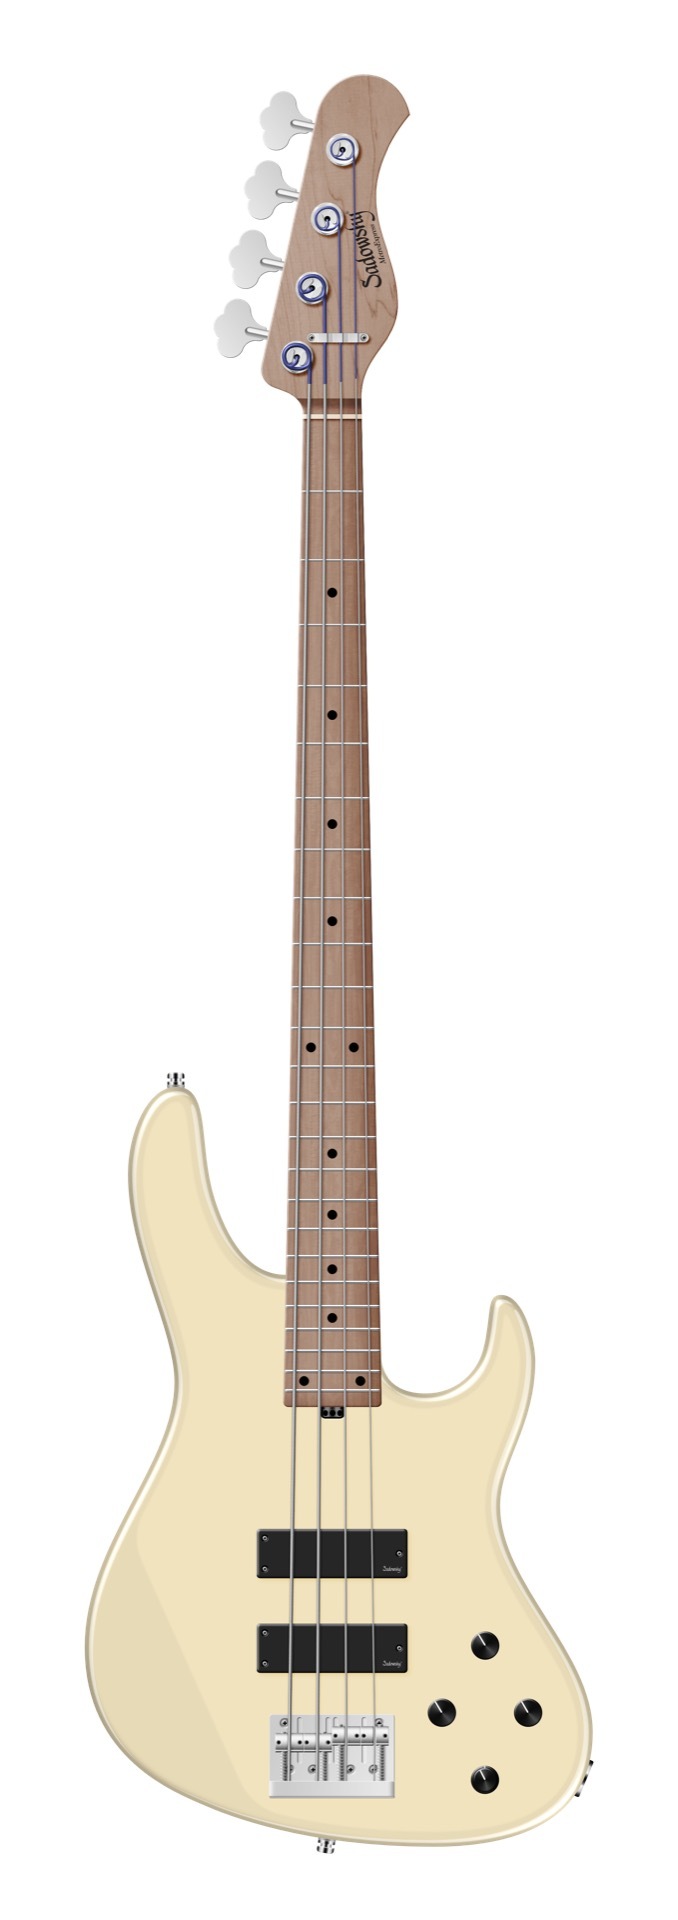 Sadowsky MetroExpress 24-Fret Modern Bass, Roasted Maple Fingerboard, 4-String - Solid Olympic White High Polish